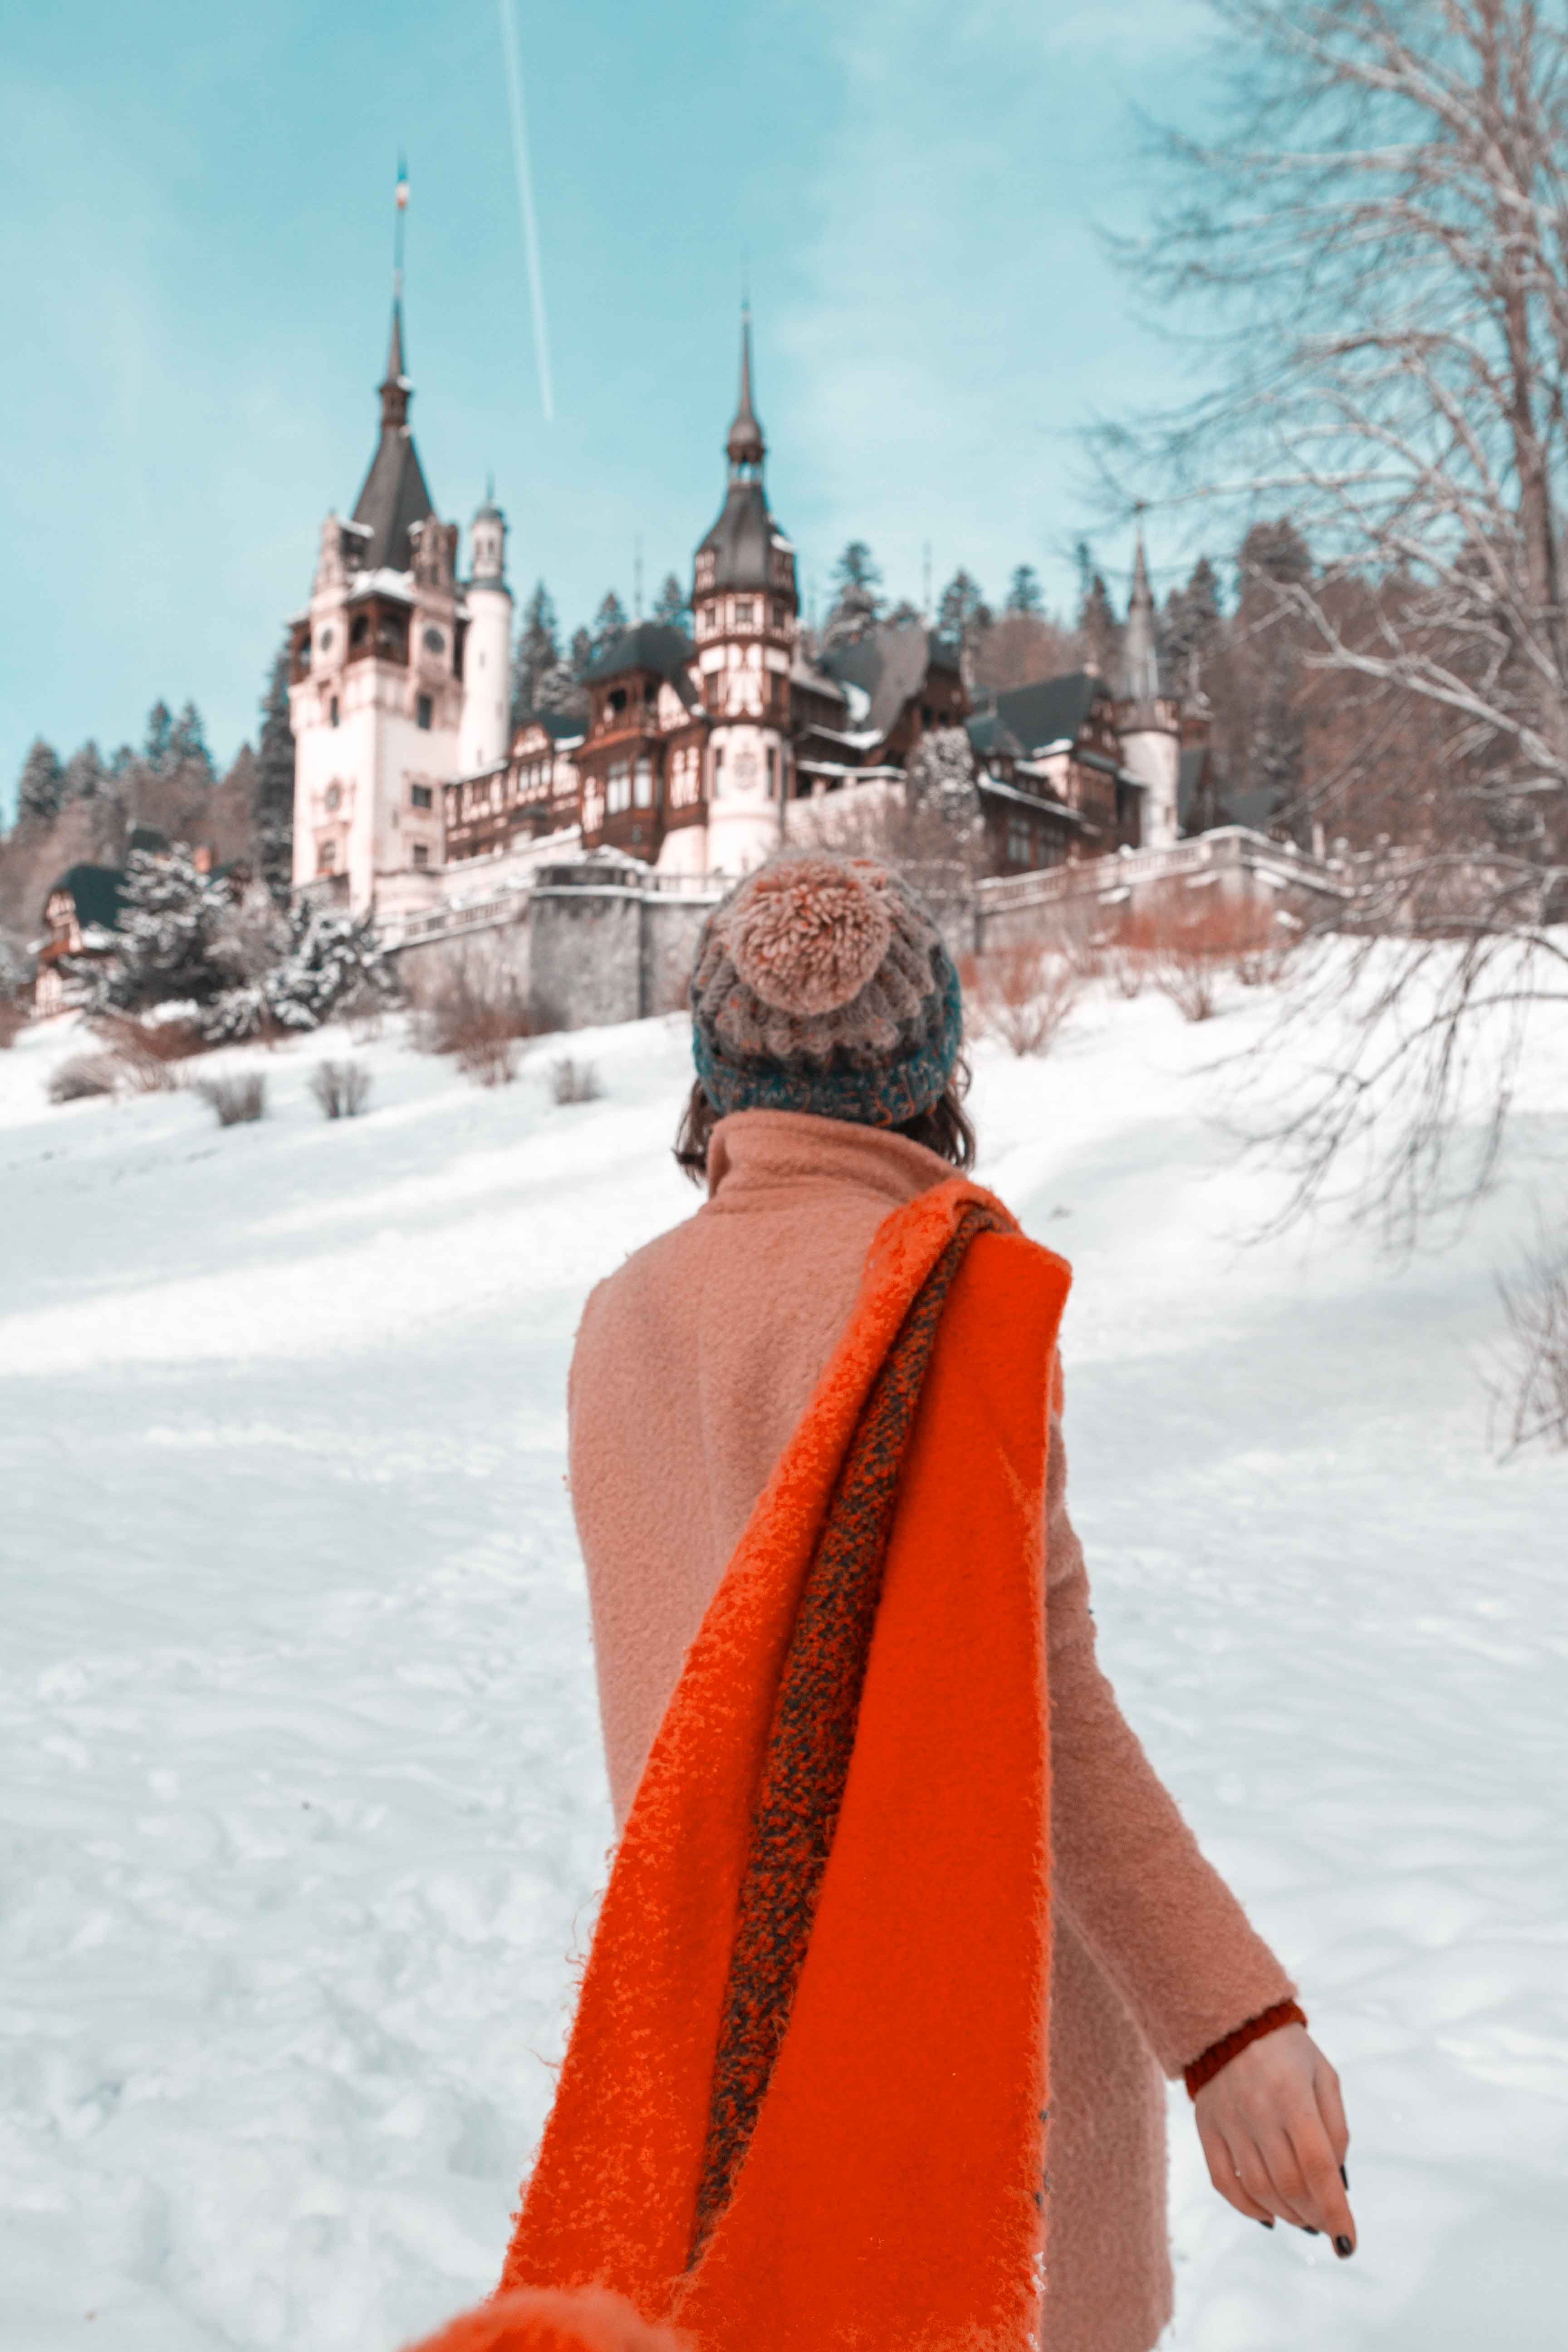 Winter wonderland in Romania: a complete guide of visiting Peles Castle